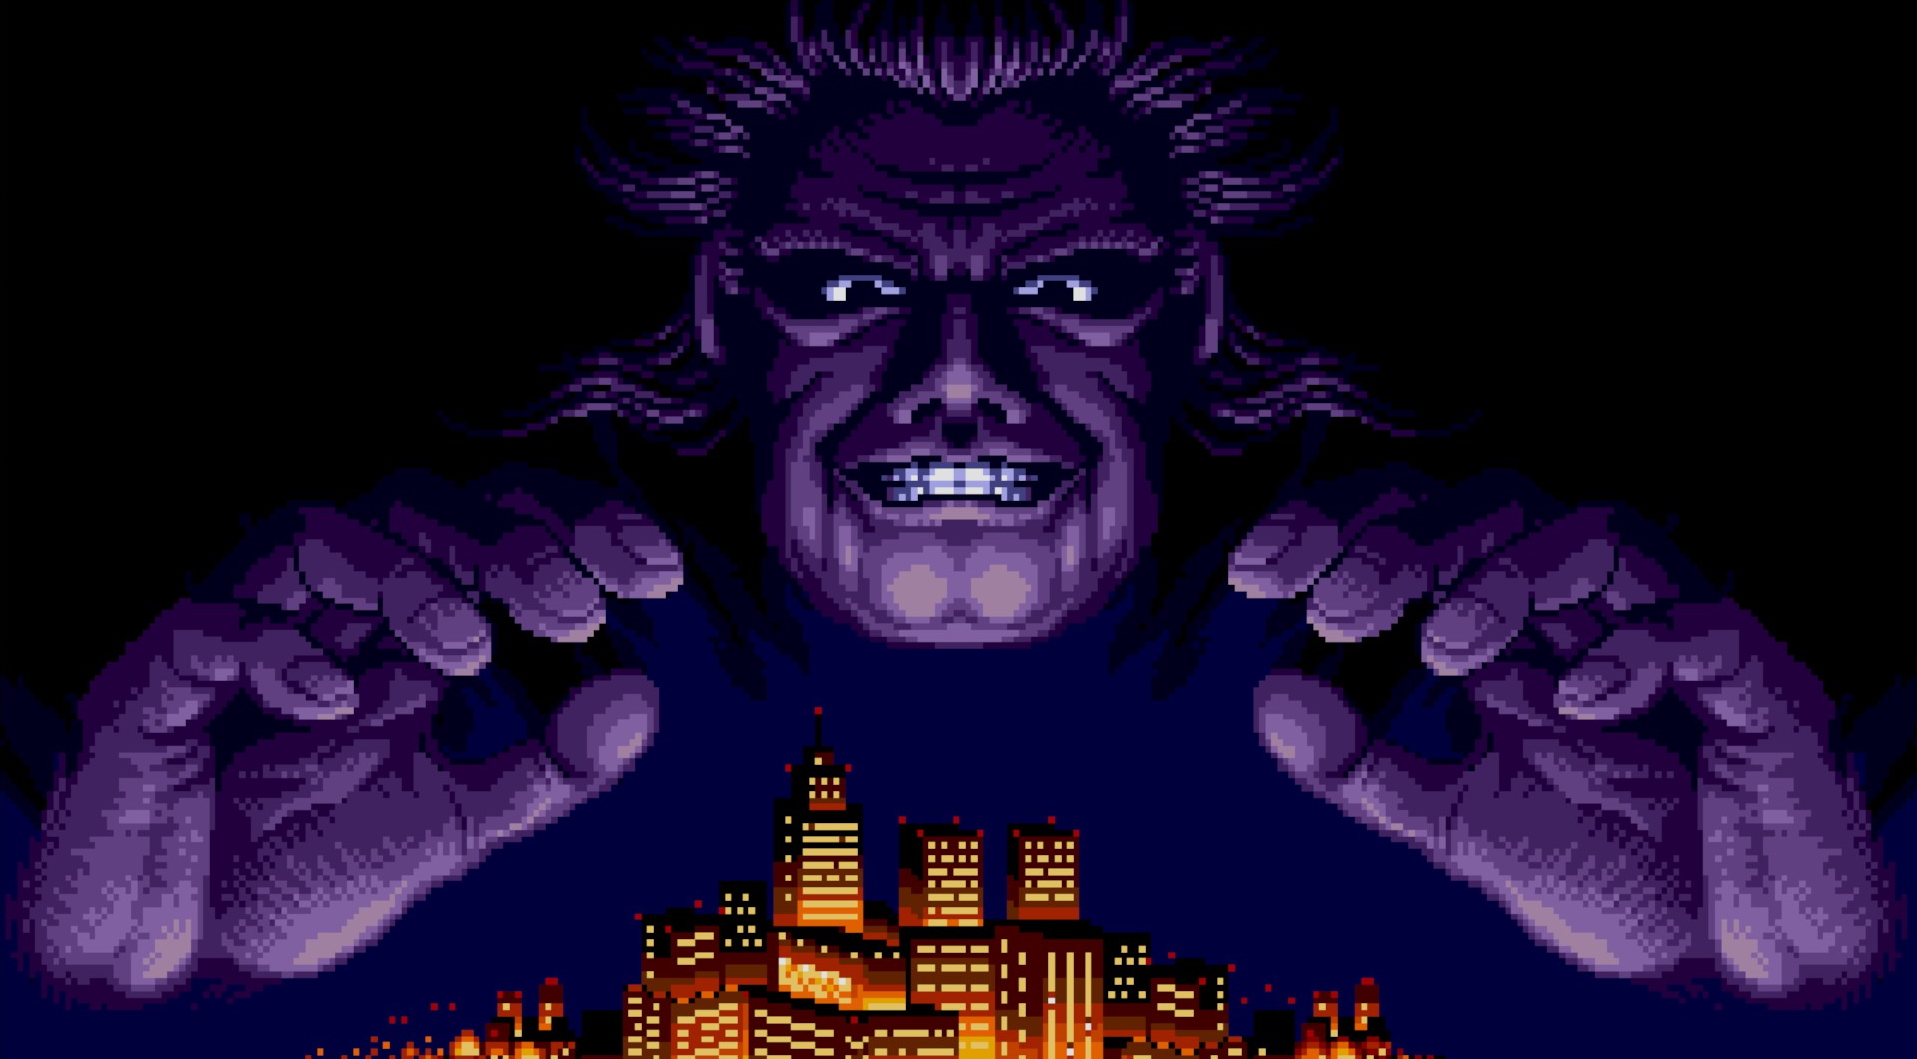 Max Unveiled As Next Character For Streets Of Rage 4: Mr. X Nightmare DLC